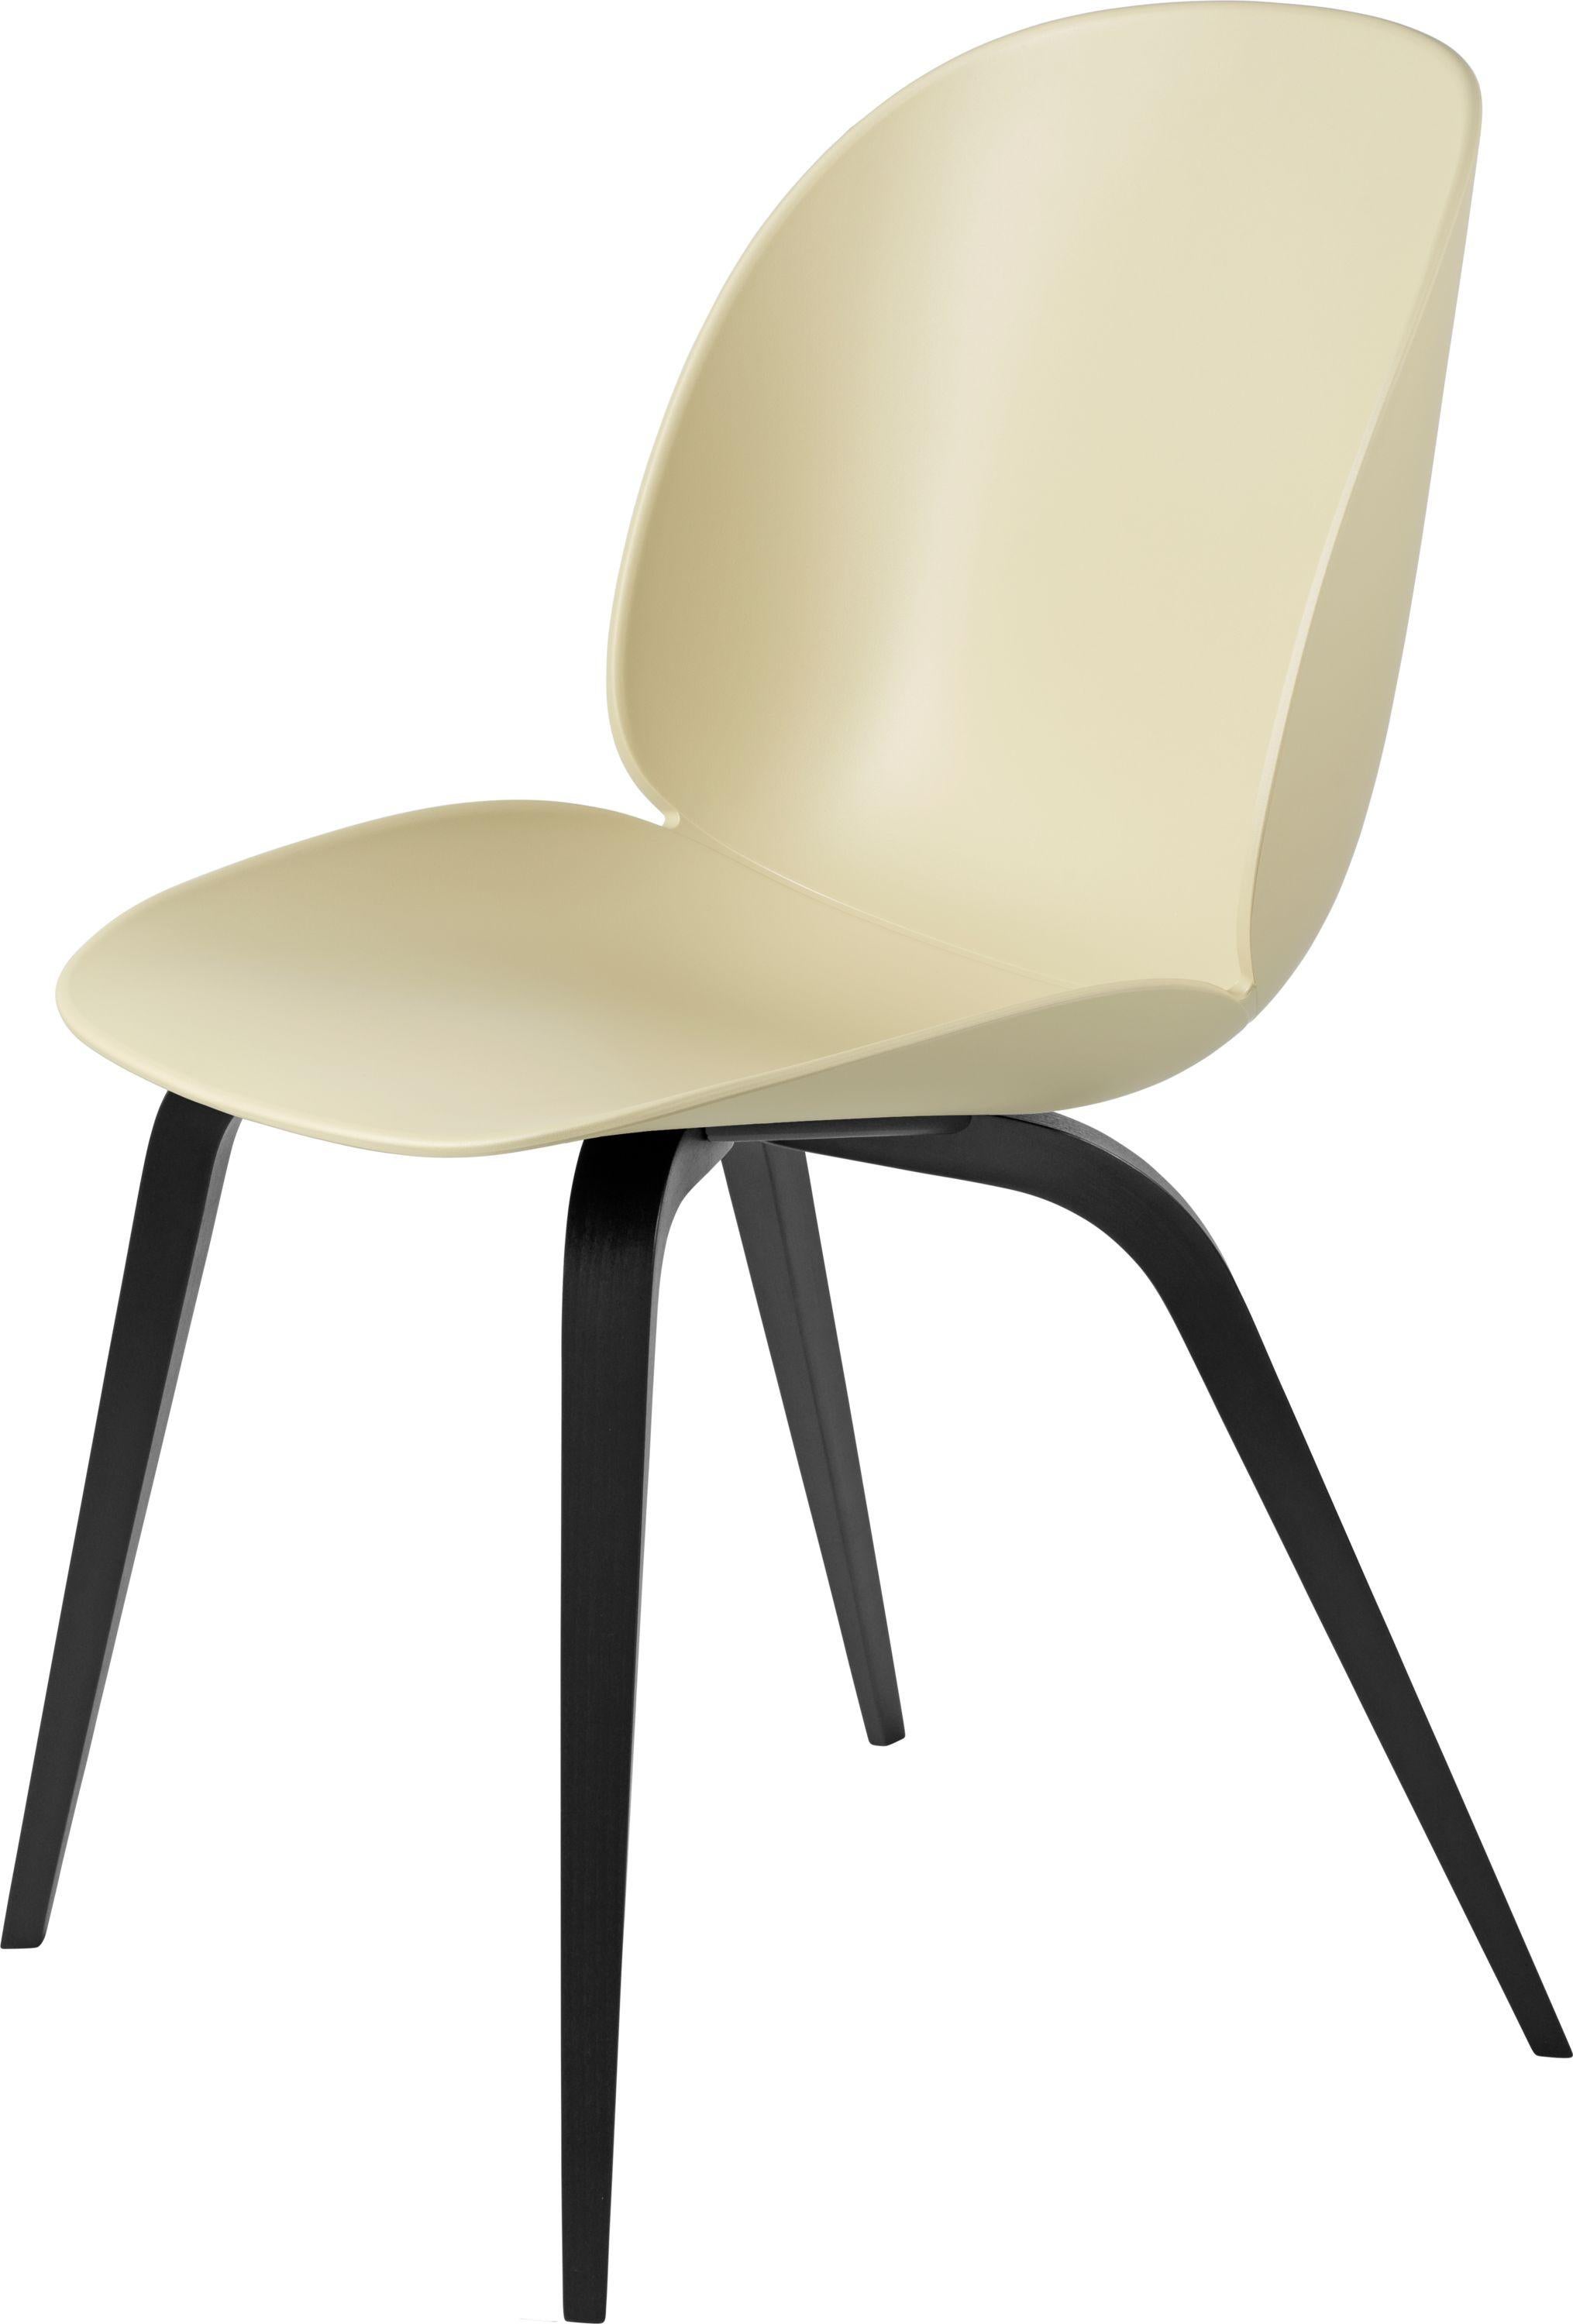 Mid-Century Modern GamFratesi 'Beetle' Dining Chair with Black Stained Beech Conic Base